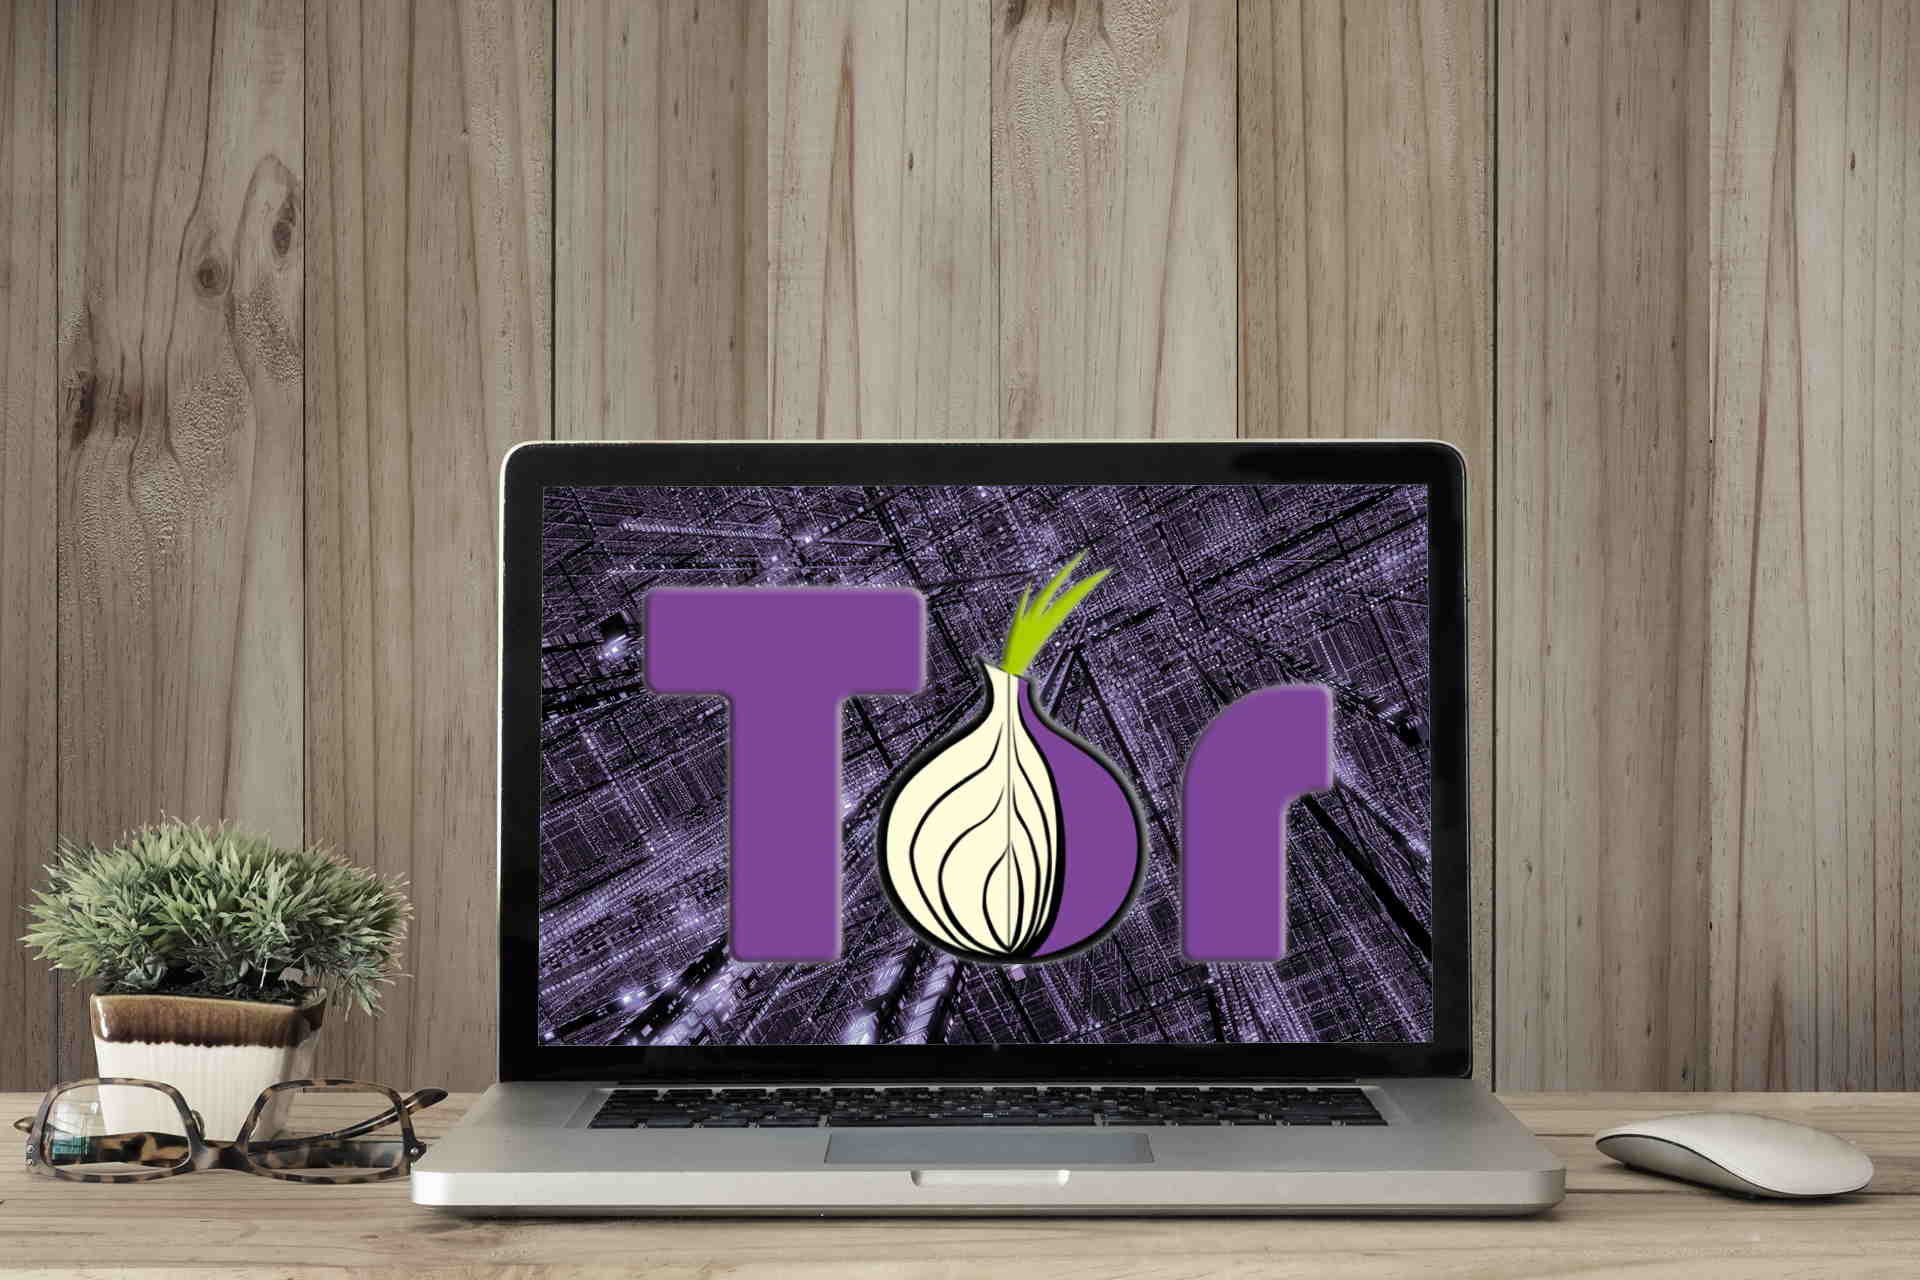 Fix Tor Browser is already running but is not responding